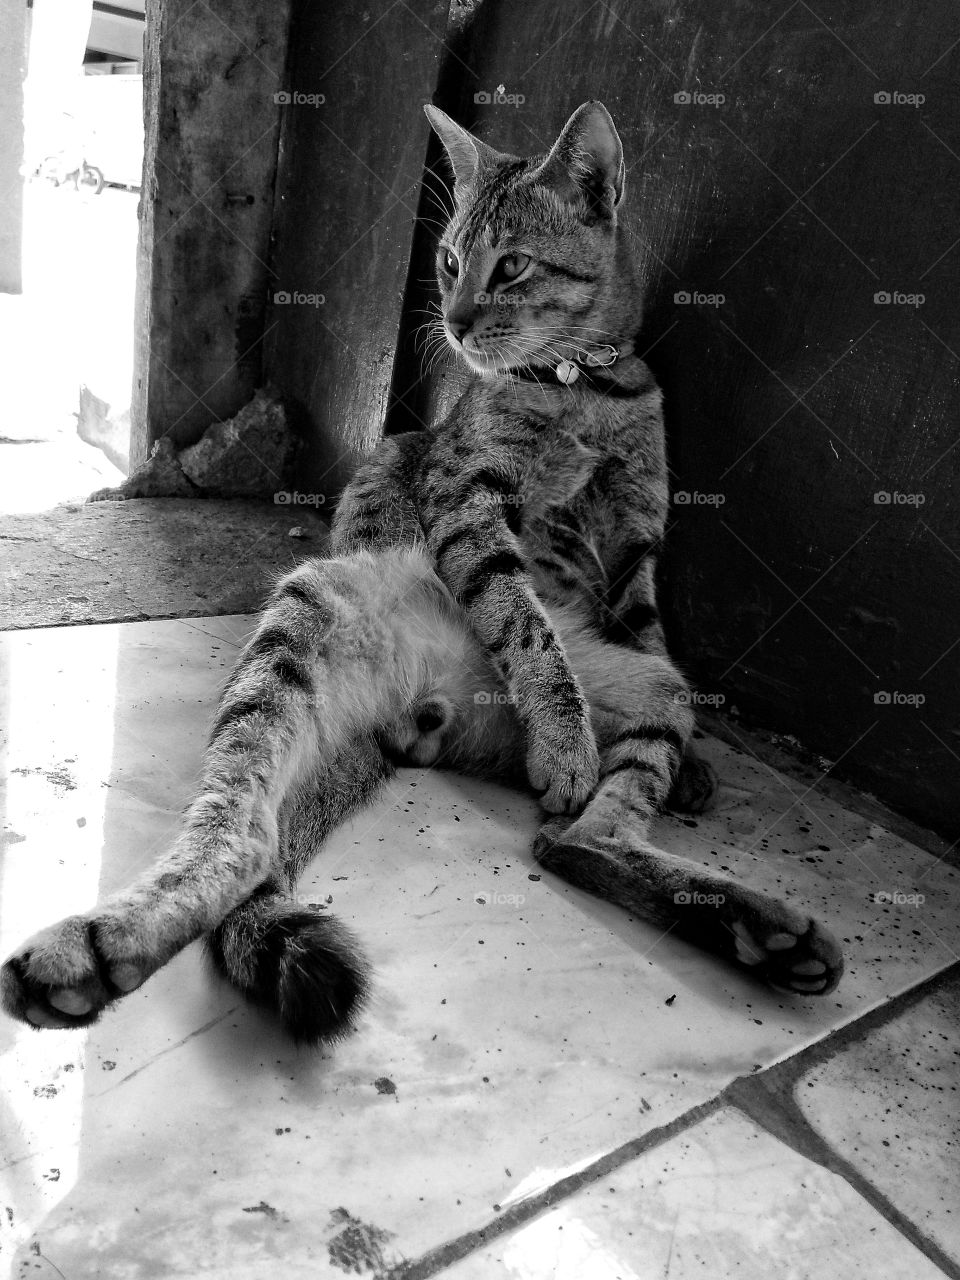 Relaxed cat.. like sit down and waiting for something